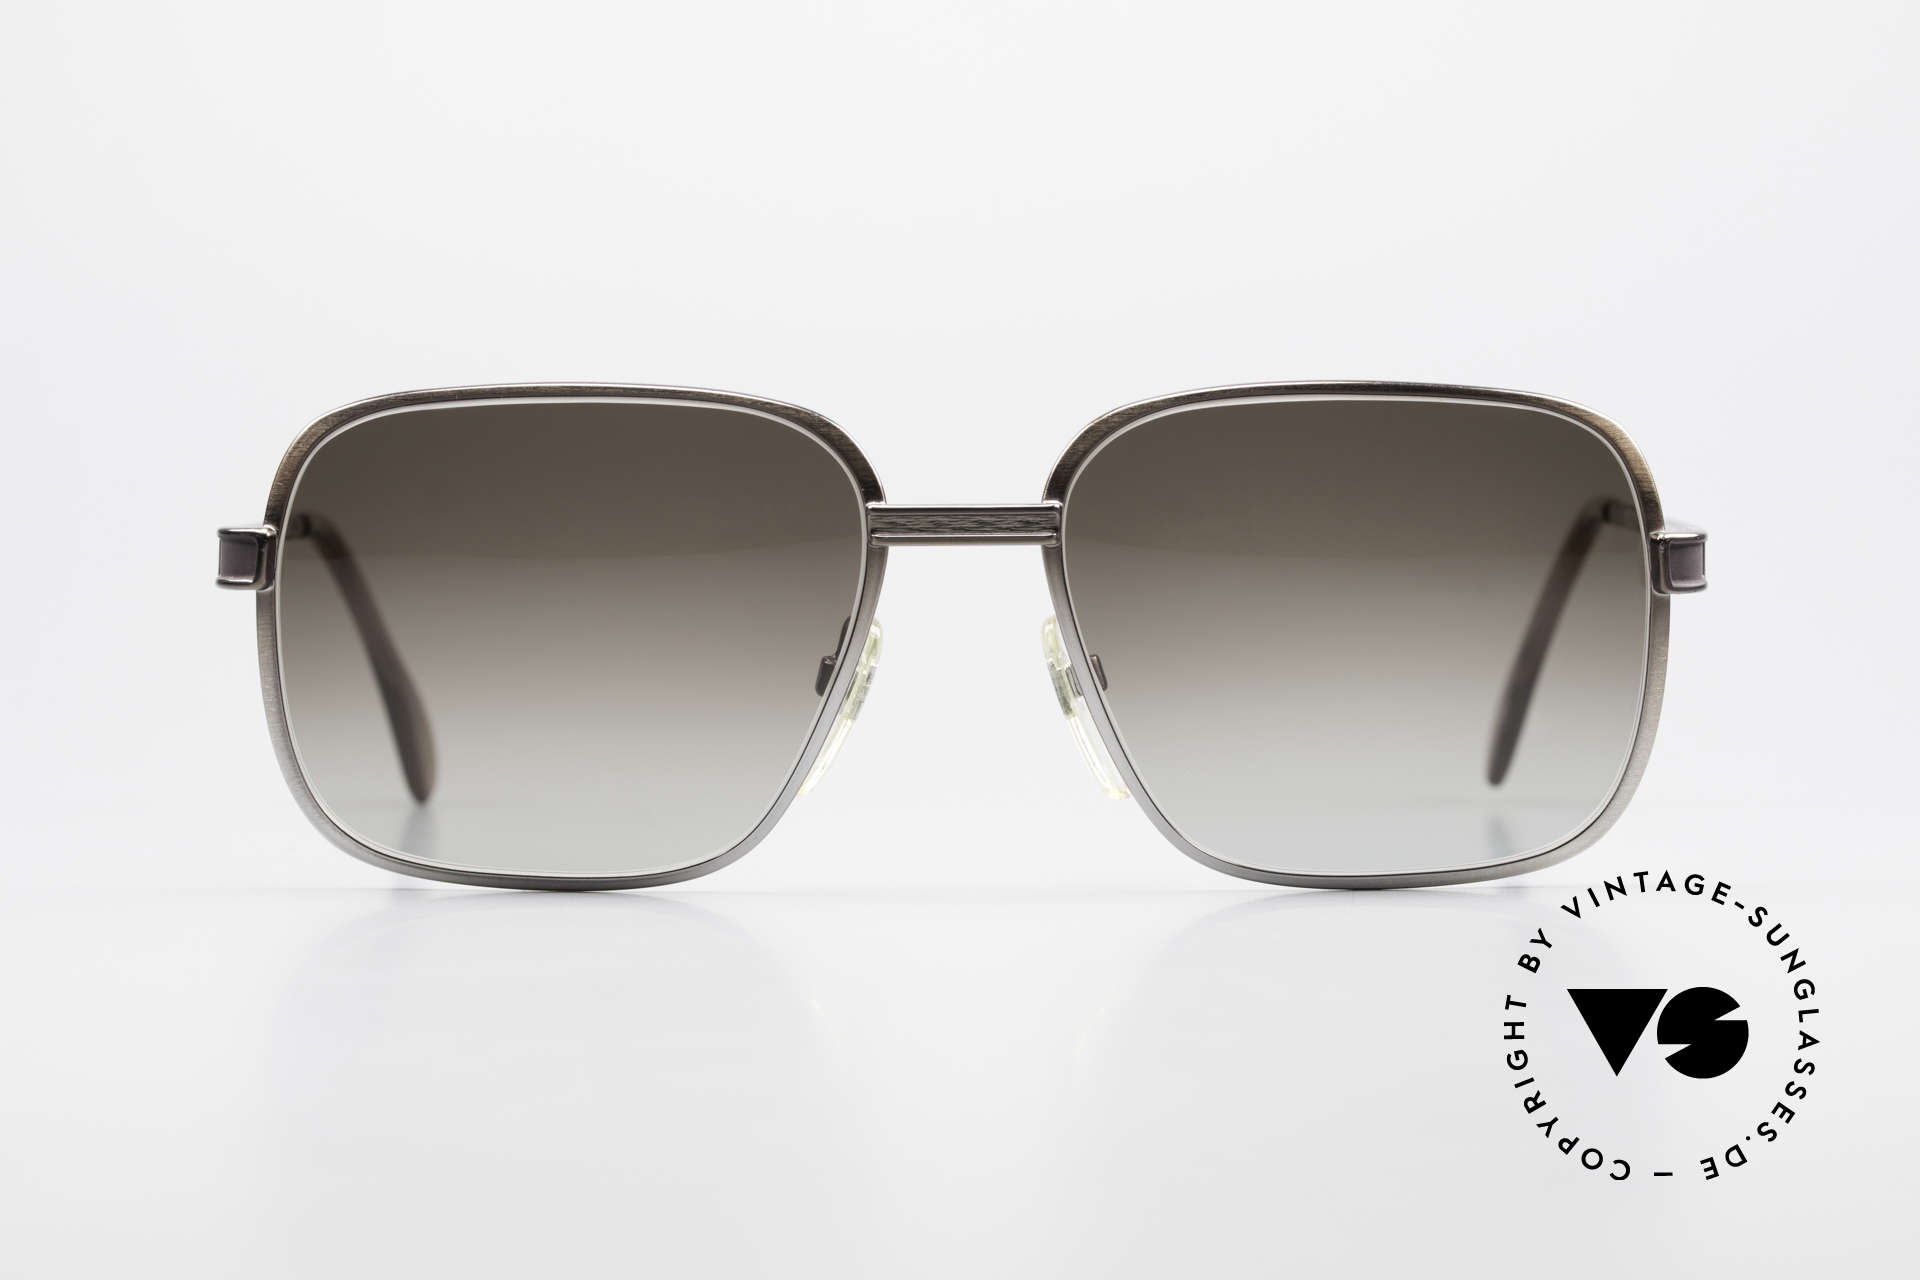 Neostyle Society 190 80's Haute Couture Sunglasses, gentlemen's 'haute couture' from the early 1980's, Made for Men